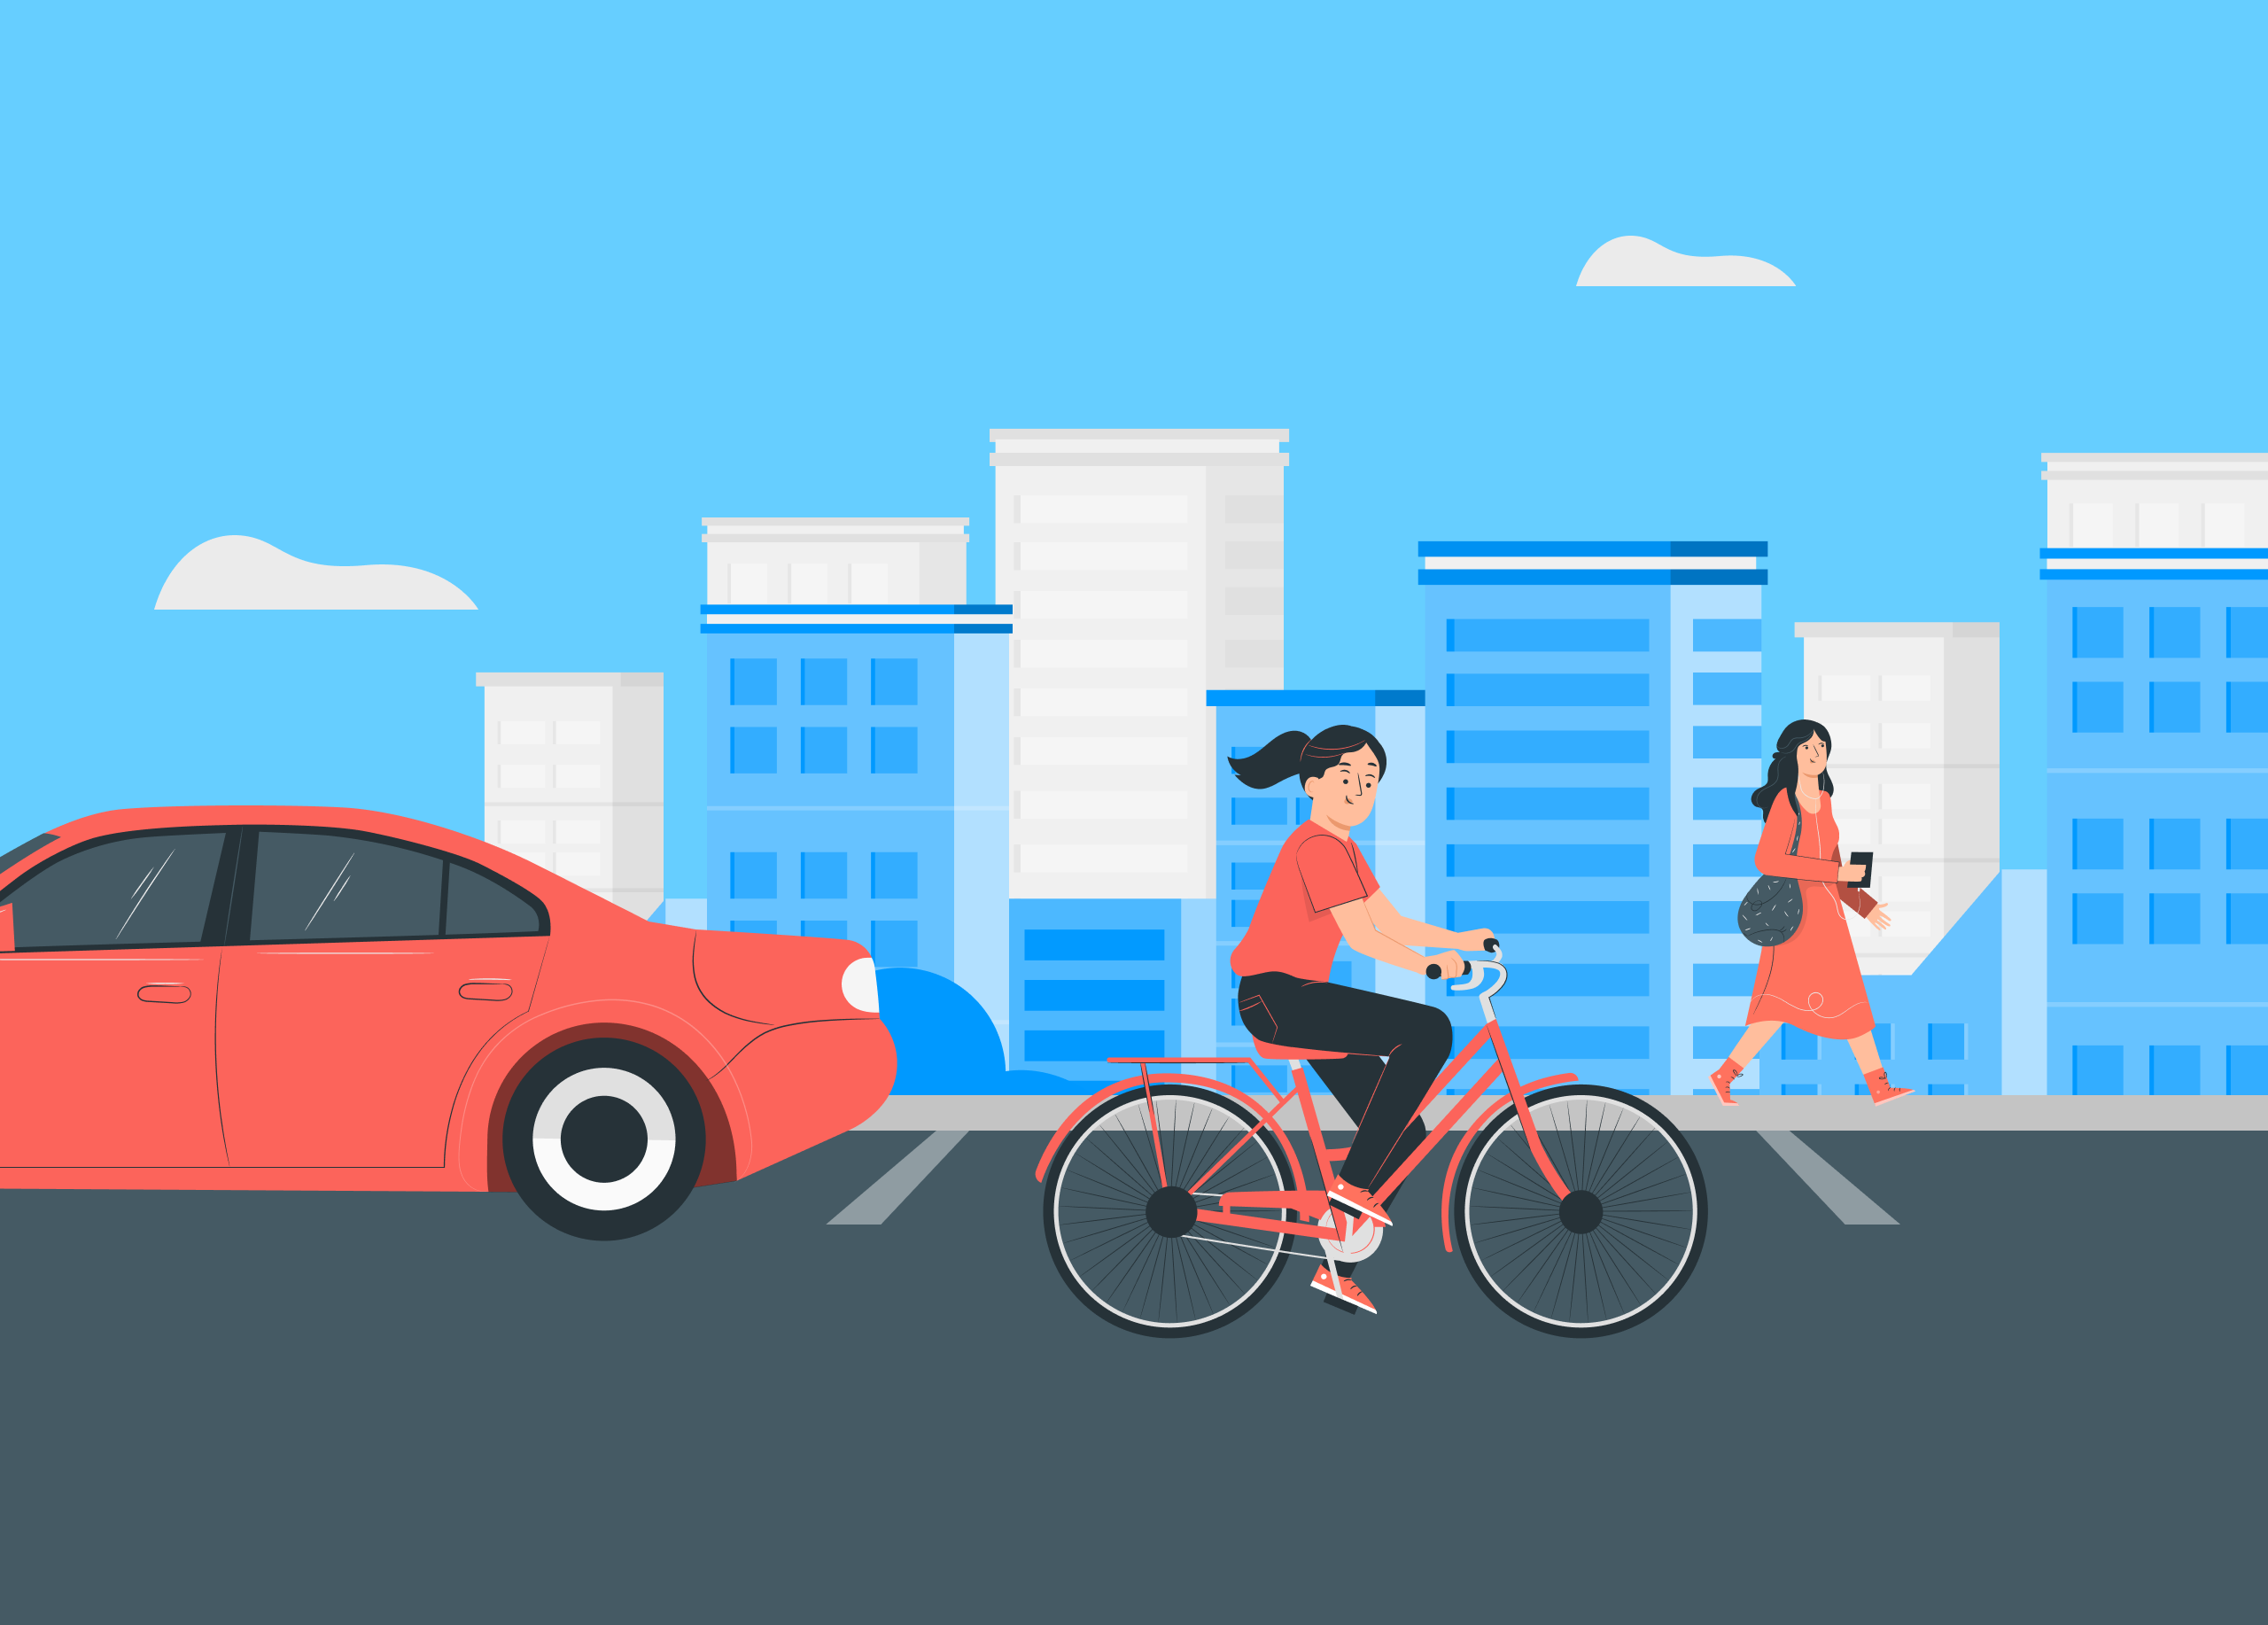 Parking management for healthier streets